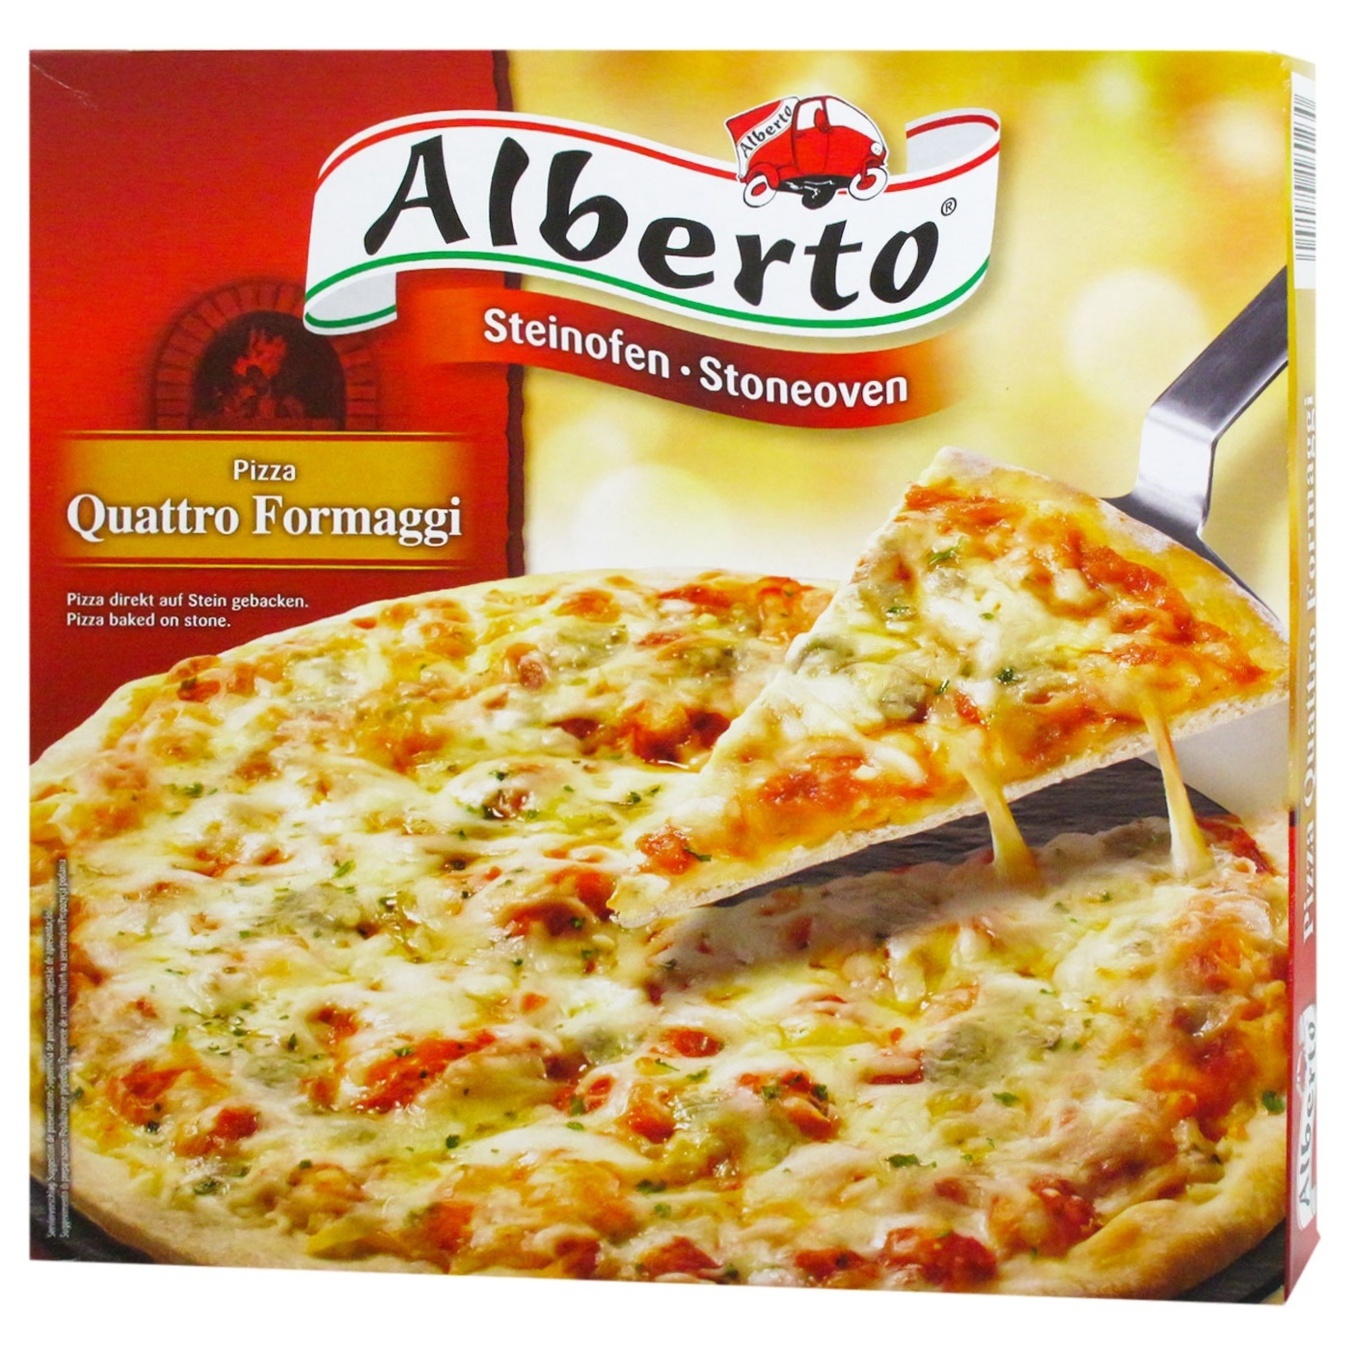 Pizza 4 cheese Alberto baked in a stone oven 320g